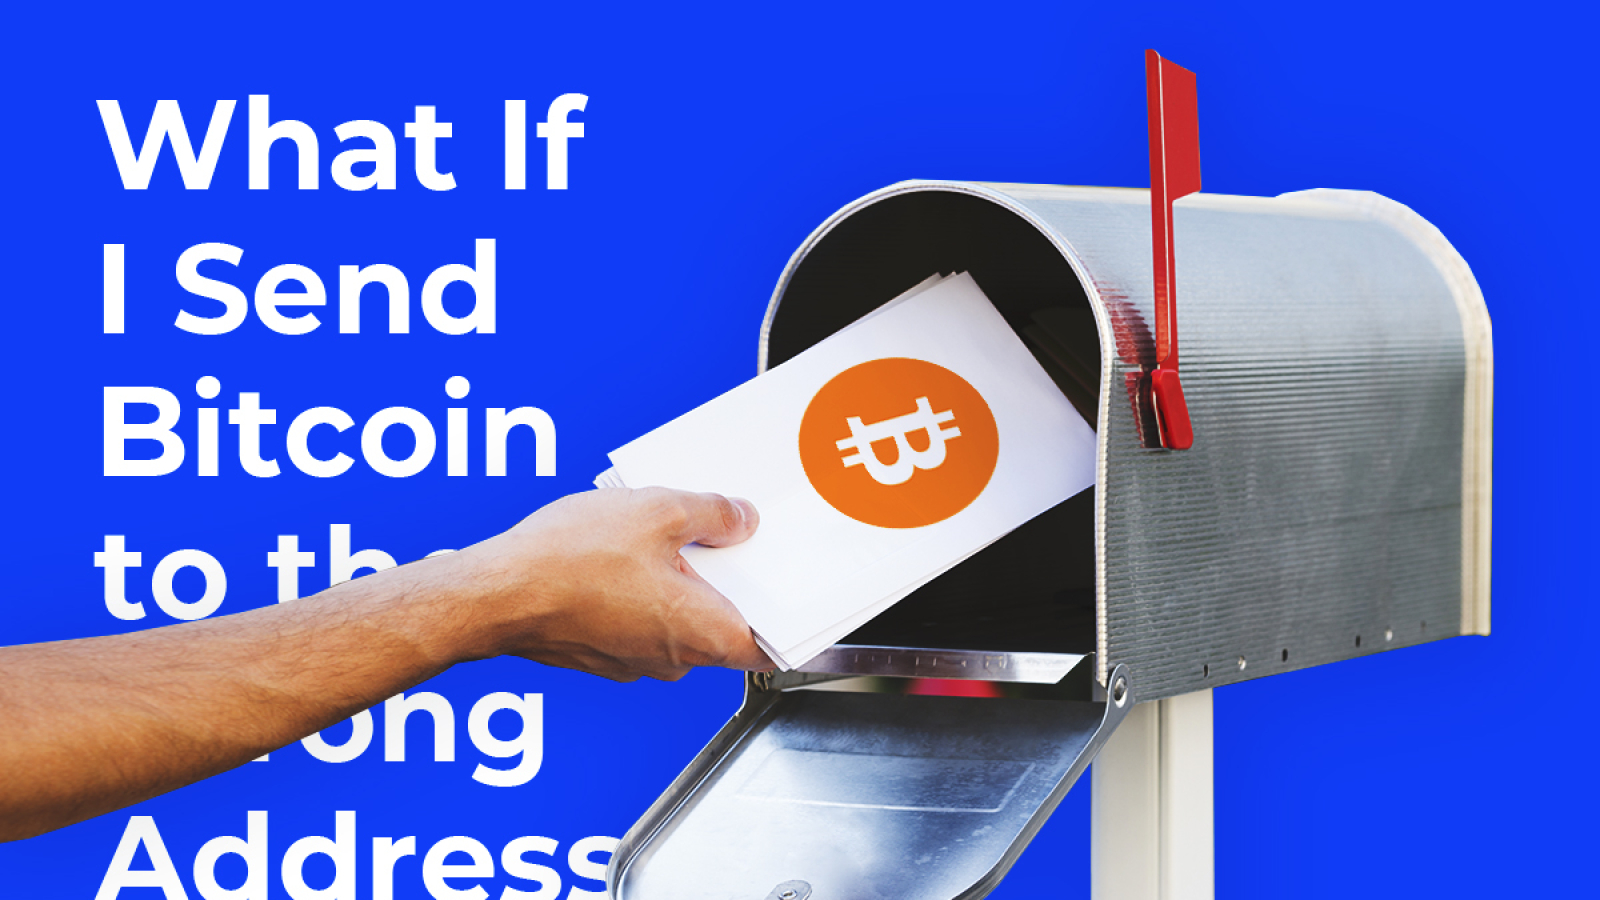 What If I Send Bitcoin to the Wrong Address?